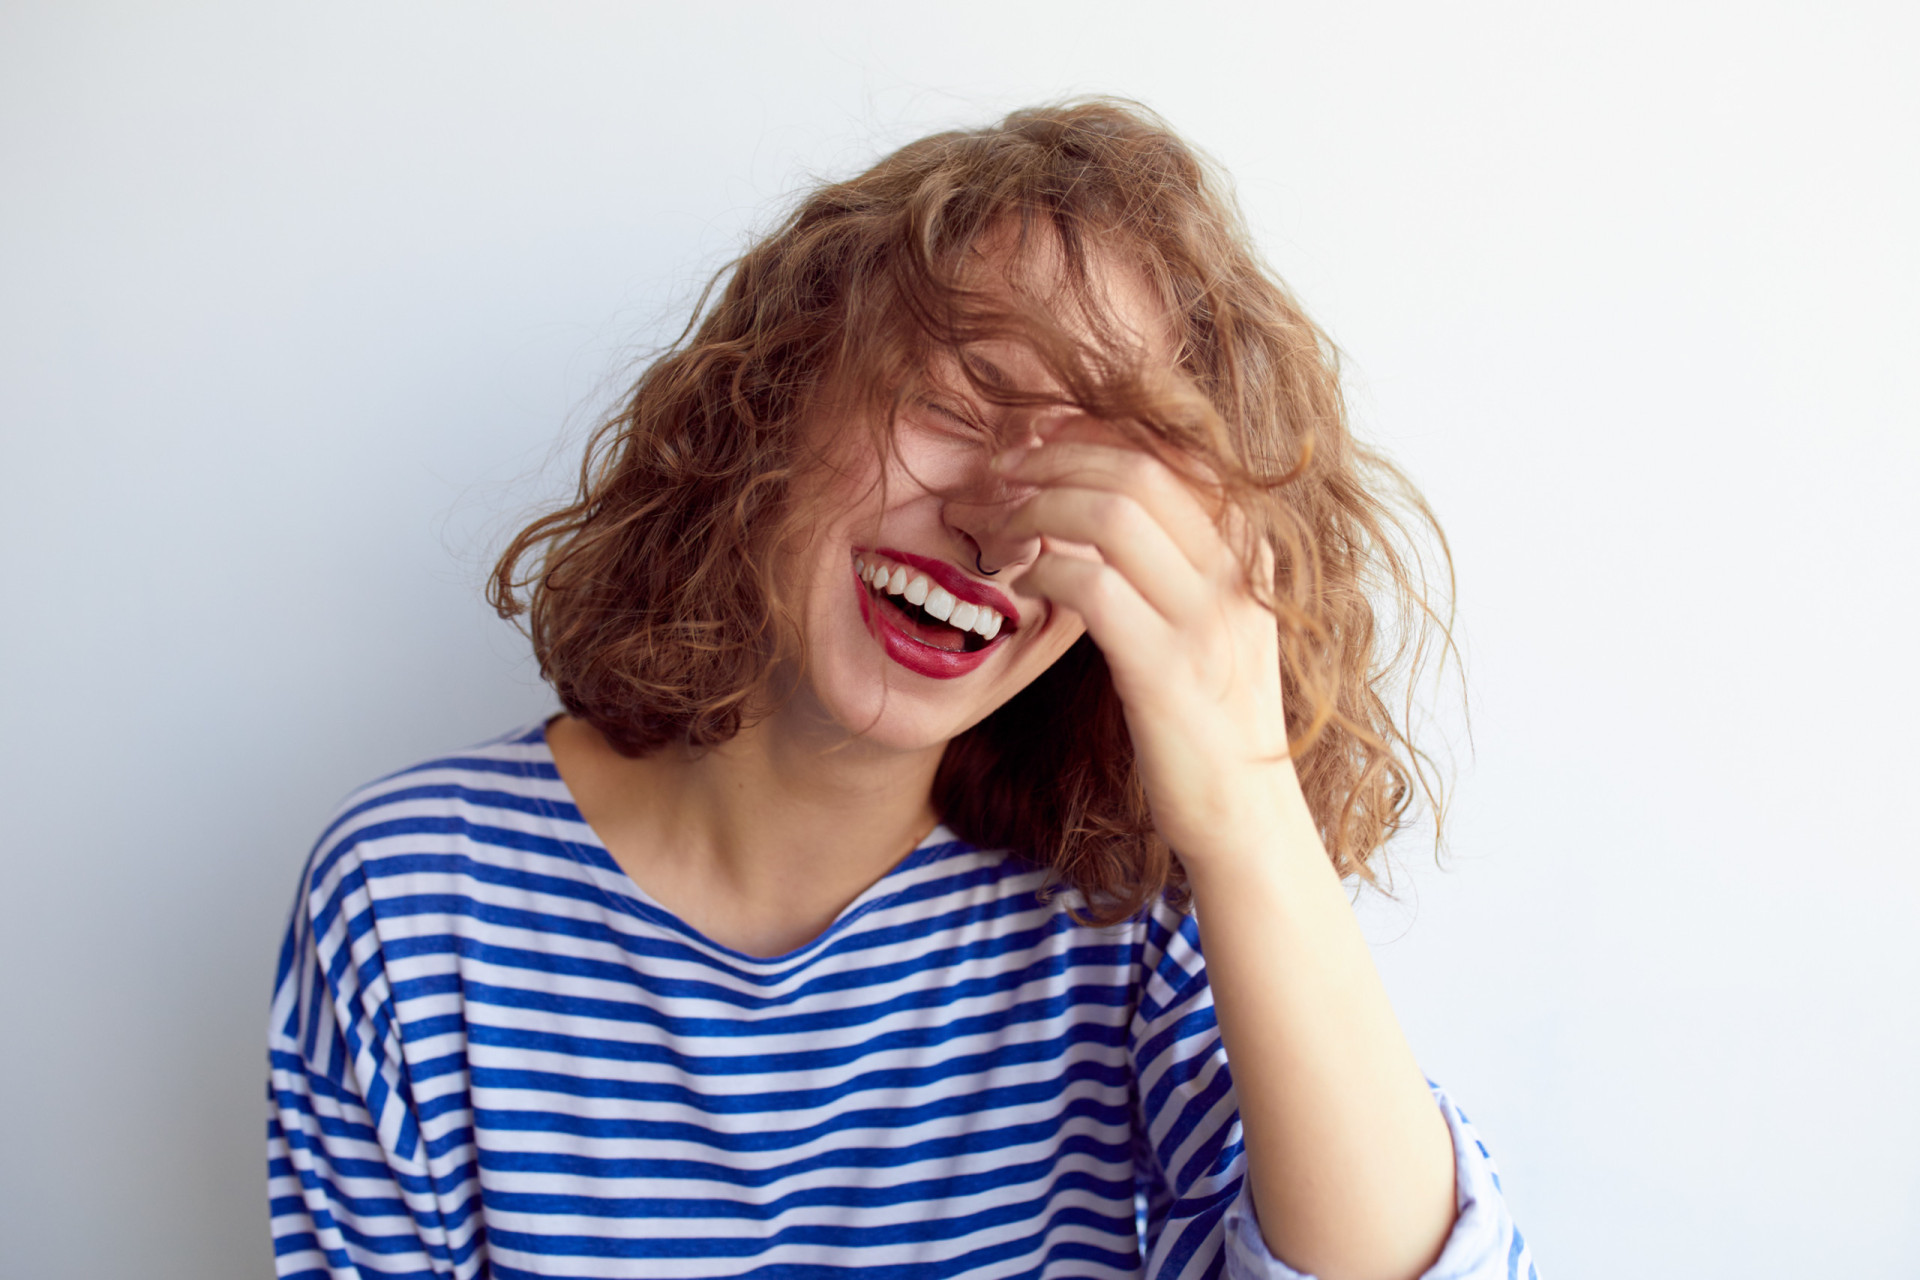 <p>This abbreviation stands for "laugh out loud" and typically means something is very funny. If you haven't been living under a rock, this one should be rather obvious!</p>